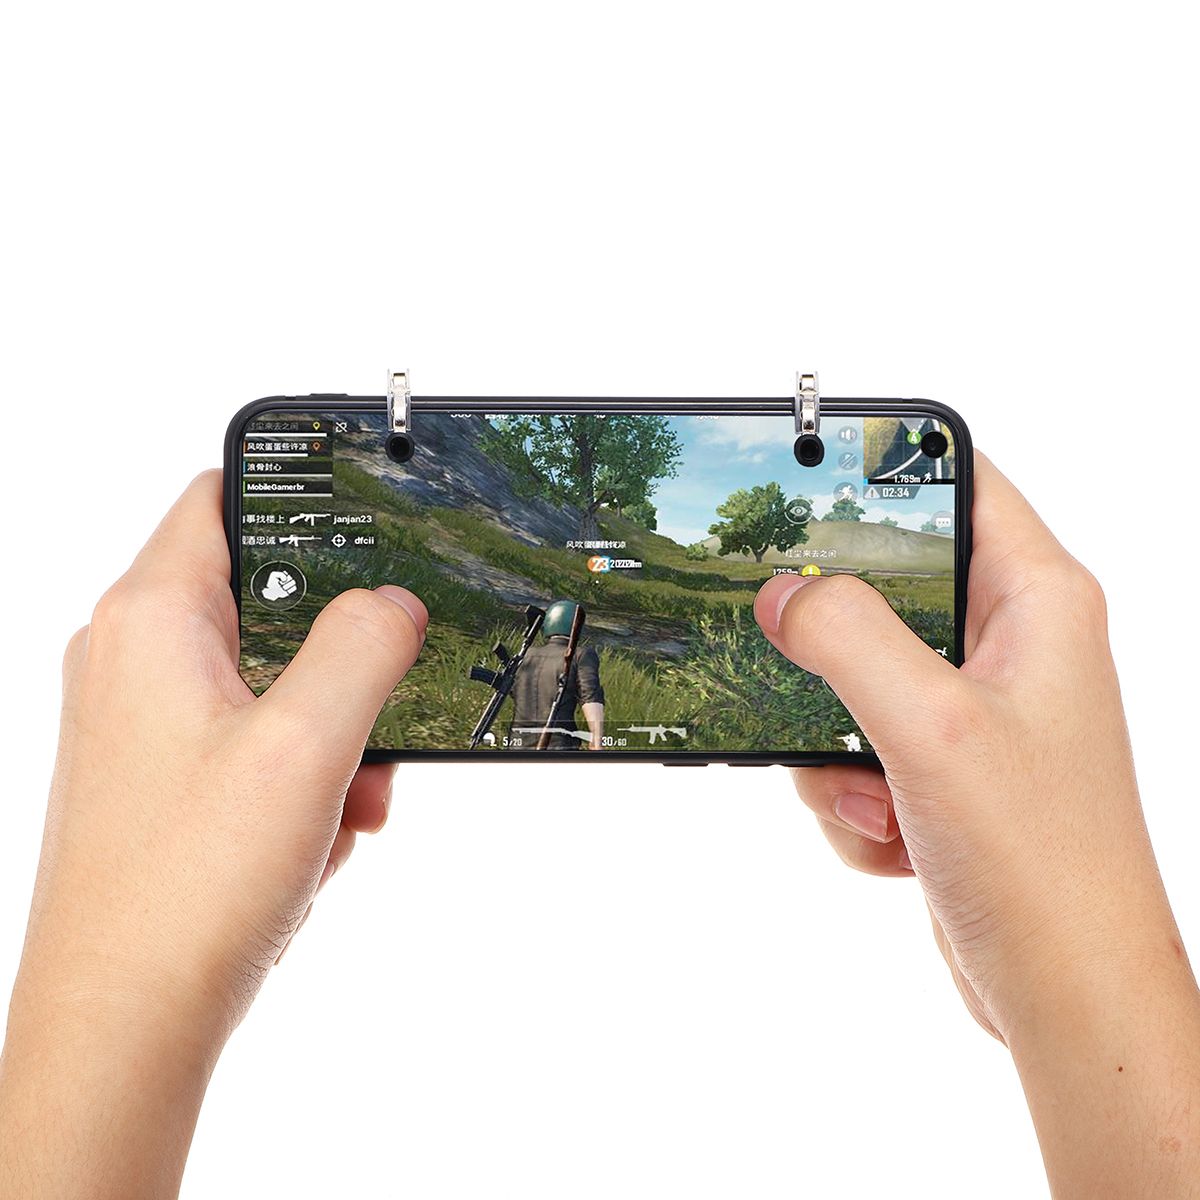 Joystick-Shooter-Button-Fire-Trigger-Game-Controller-for-PUBG-Mobile-Game-for-iPhone-Android-Smart-P-1522680